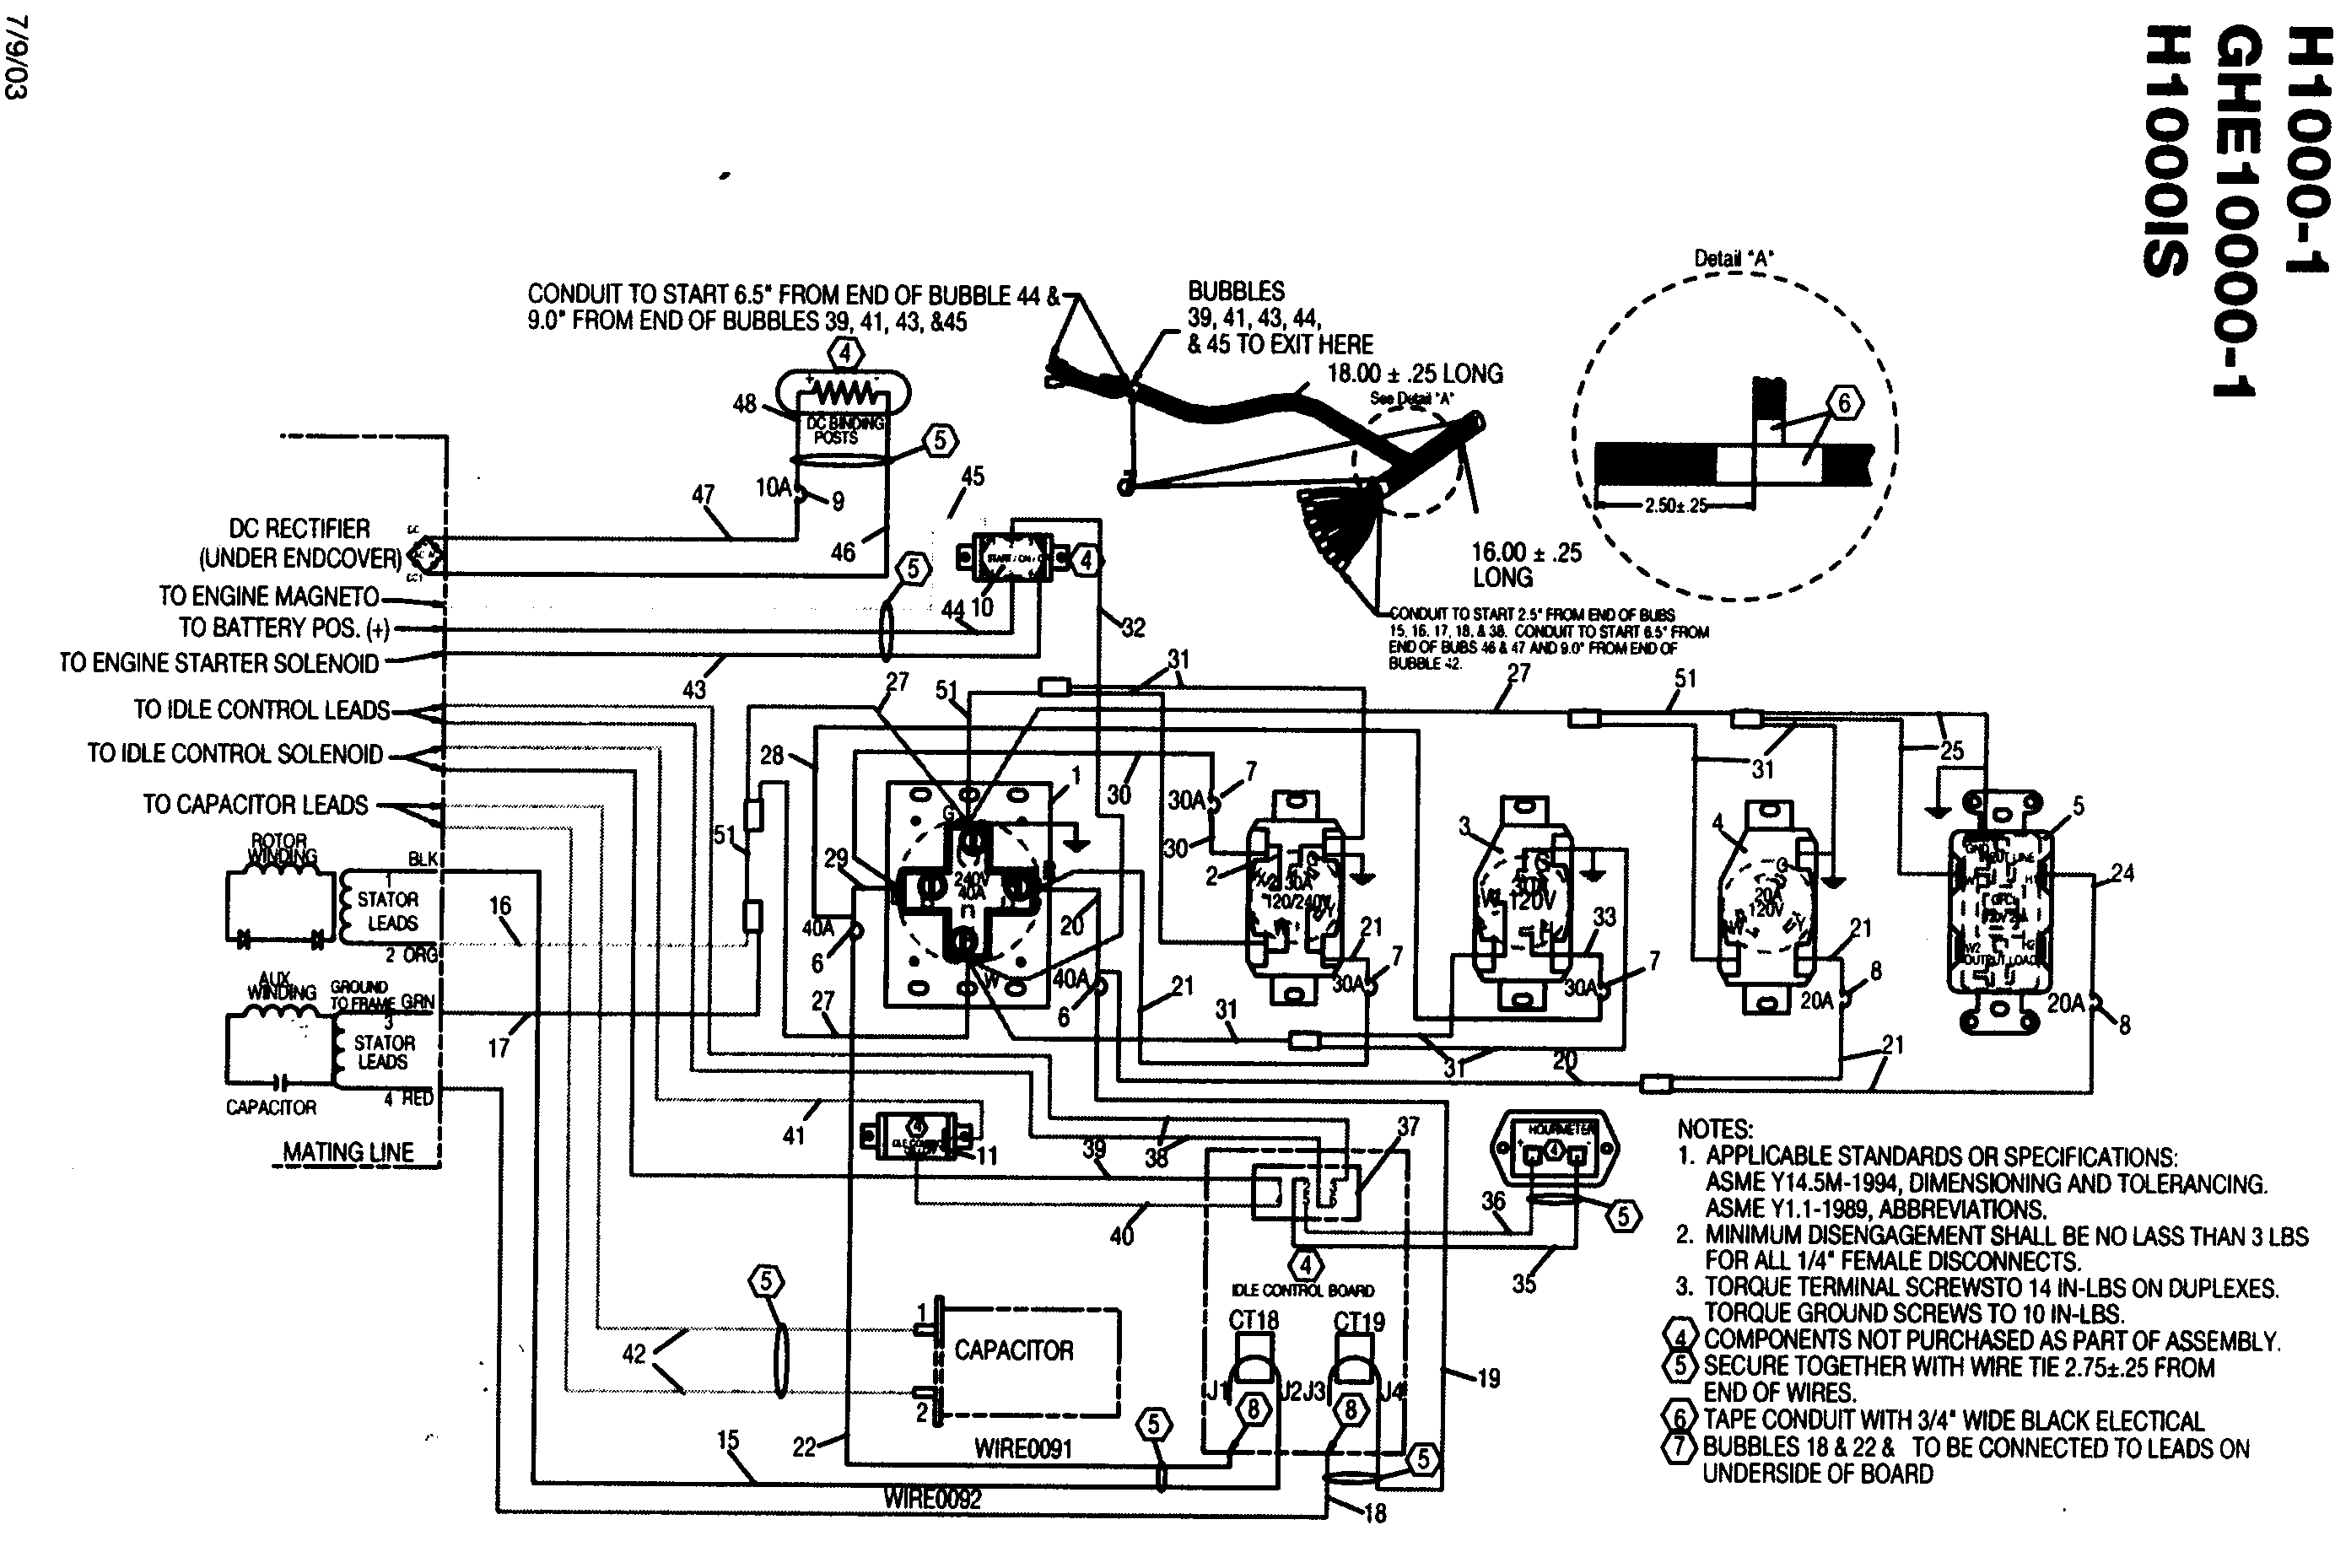 Porter Cable Air Compressor Wiring Diagram from c.searspartsdirect.com